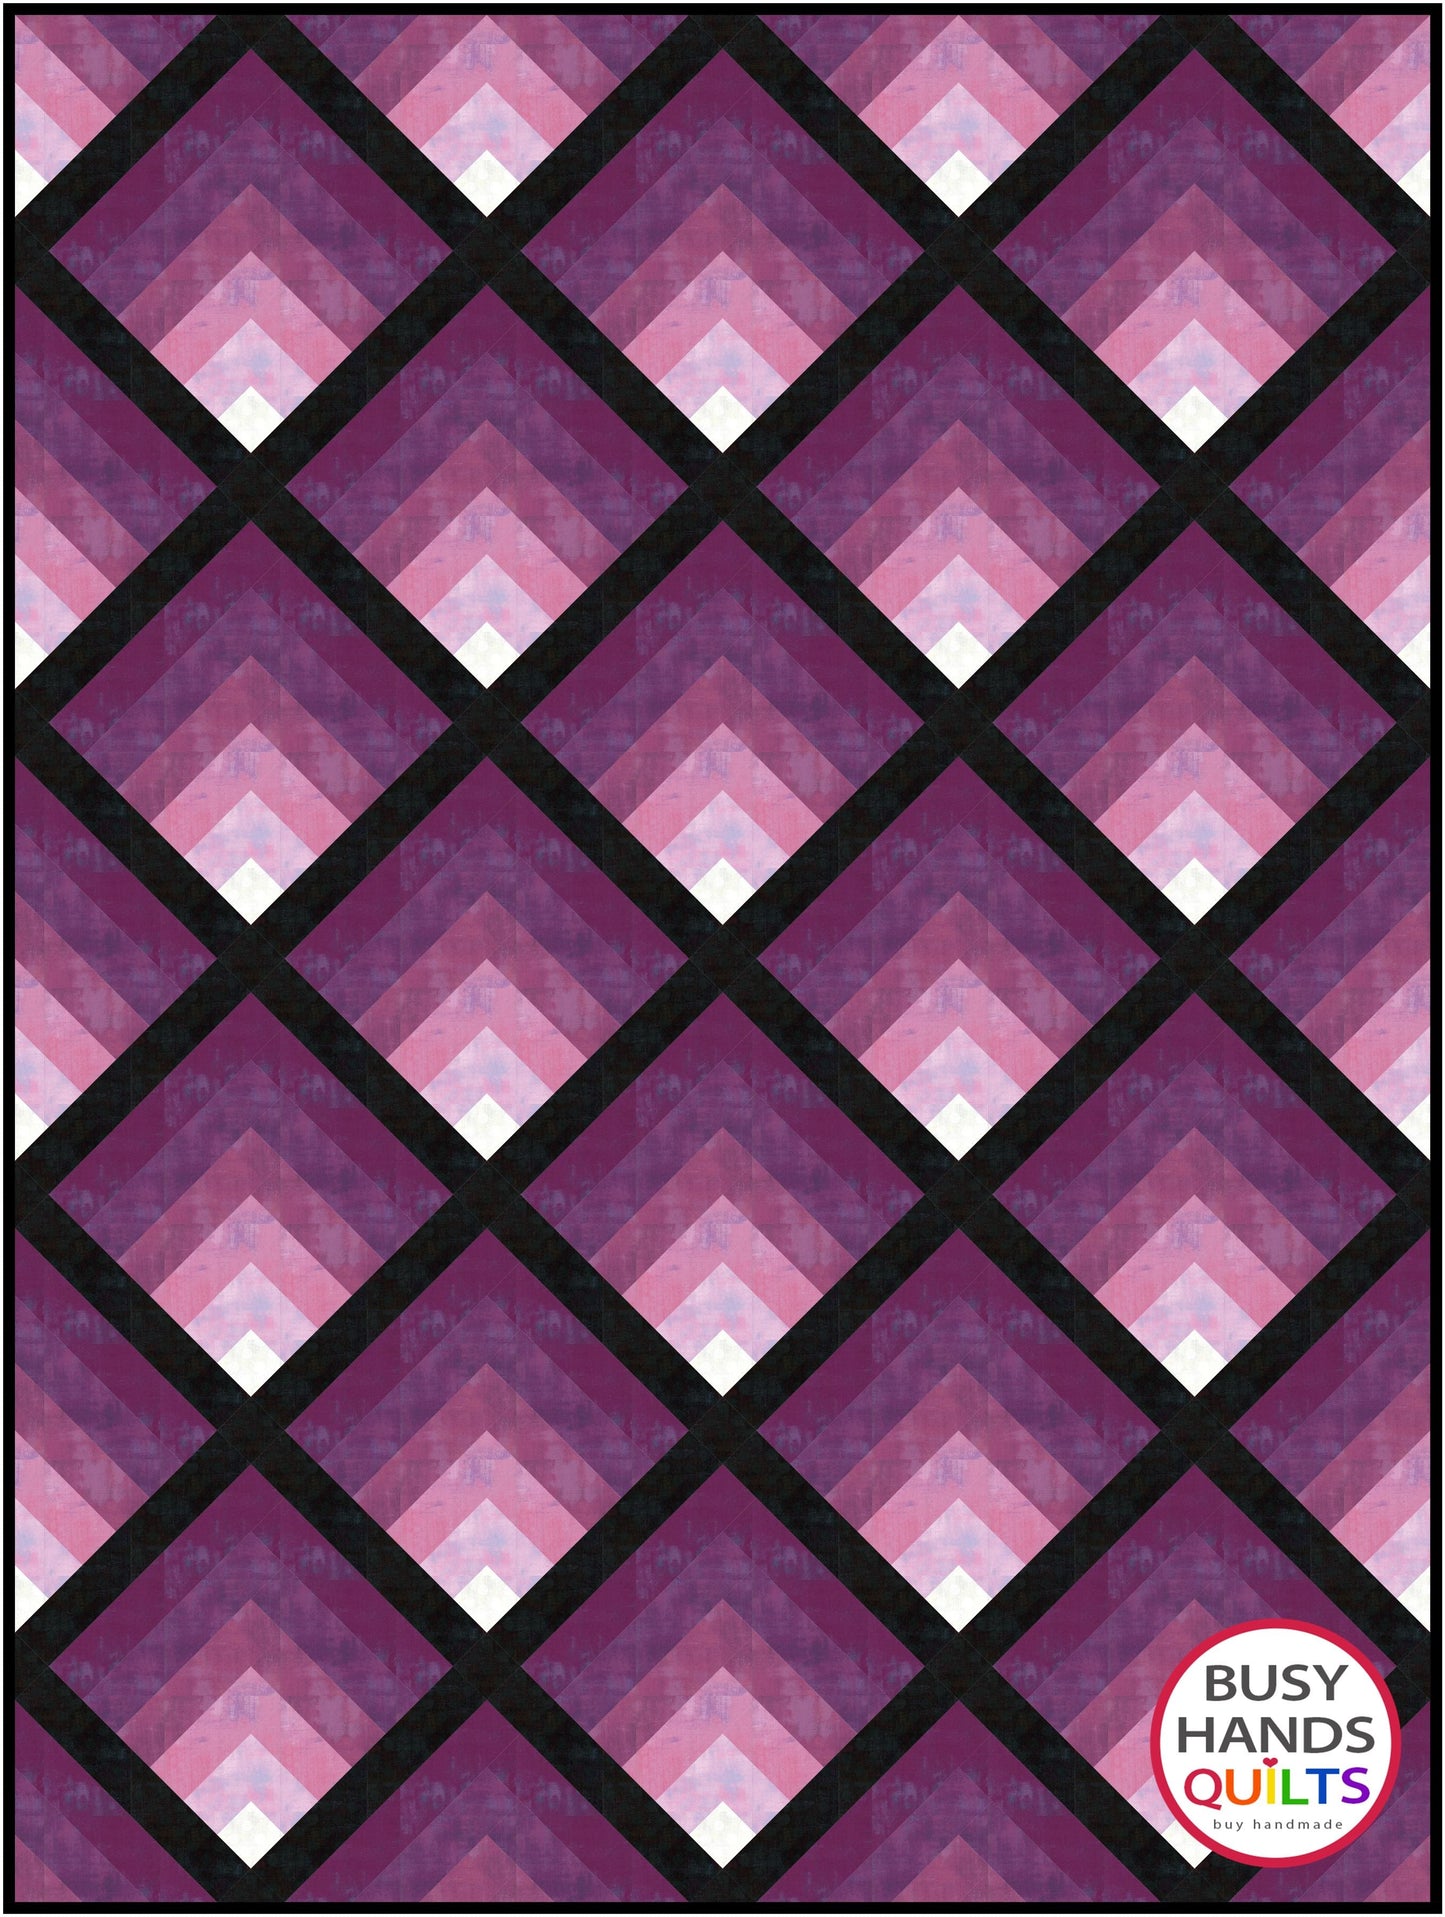 Waterfall II Quilt Pattern PDF DOWNLOAD Busy Hands Quilts $12.99